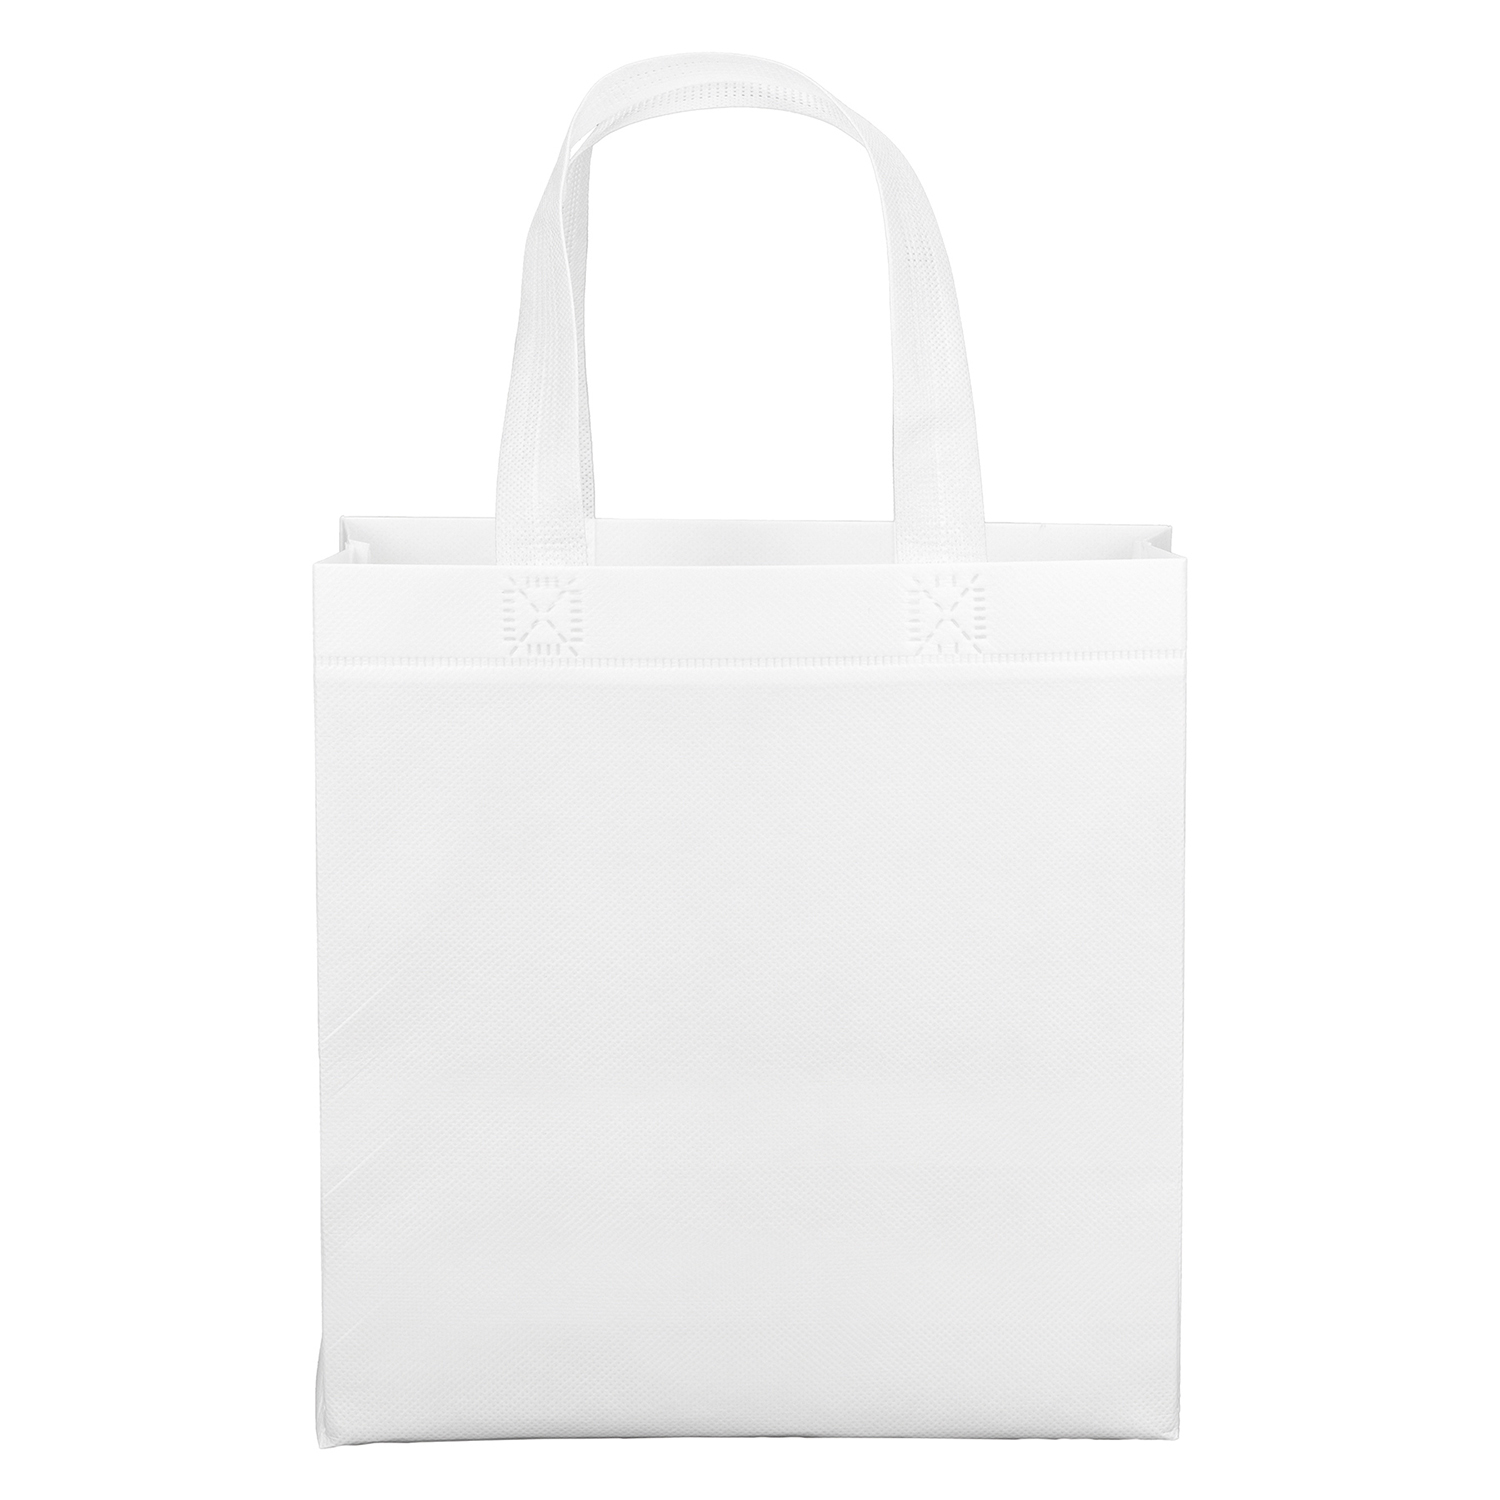 Bag Makers DYLP99 - Custom Printed Eco-Friendly Promotional Non-Woven Grocery Tote Bag